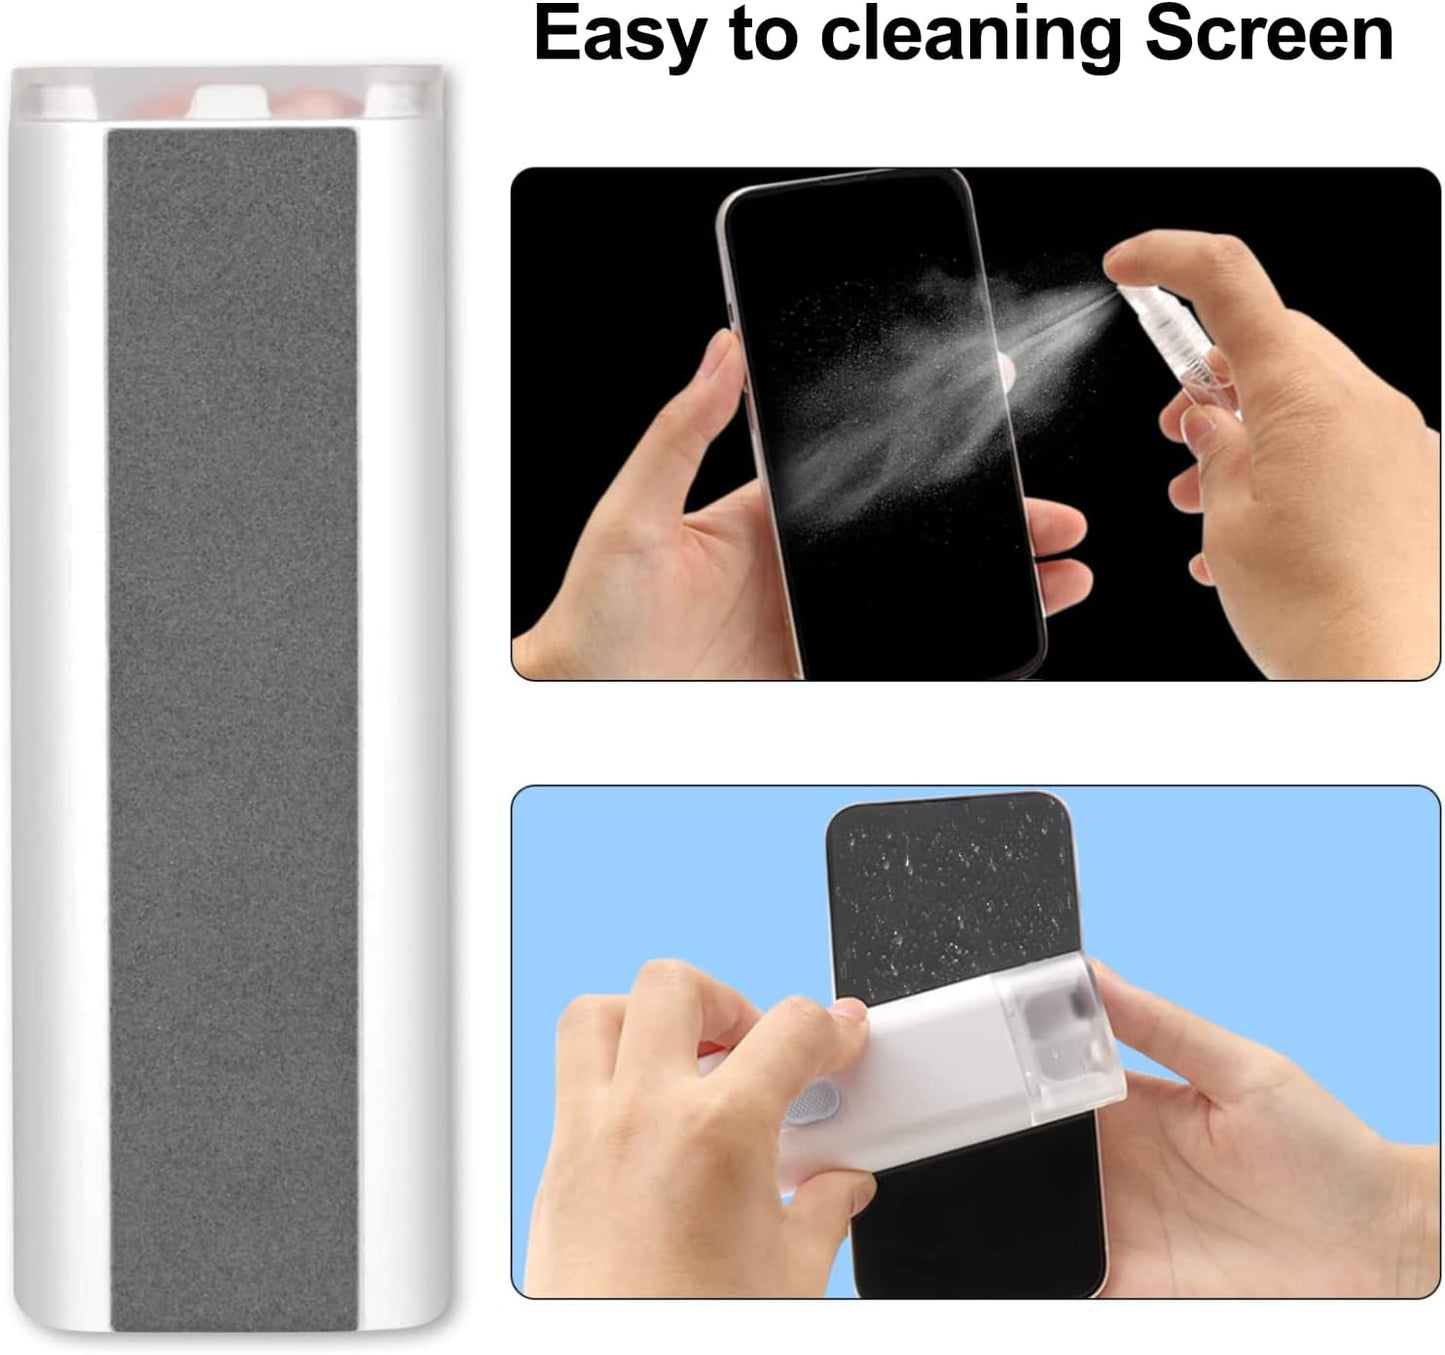 Spring 7-In-1 Electronic Cleaner Kit,Keyboard Cleaner,Laptop Cleaner Kit for Monitor